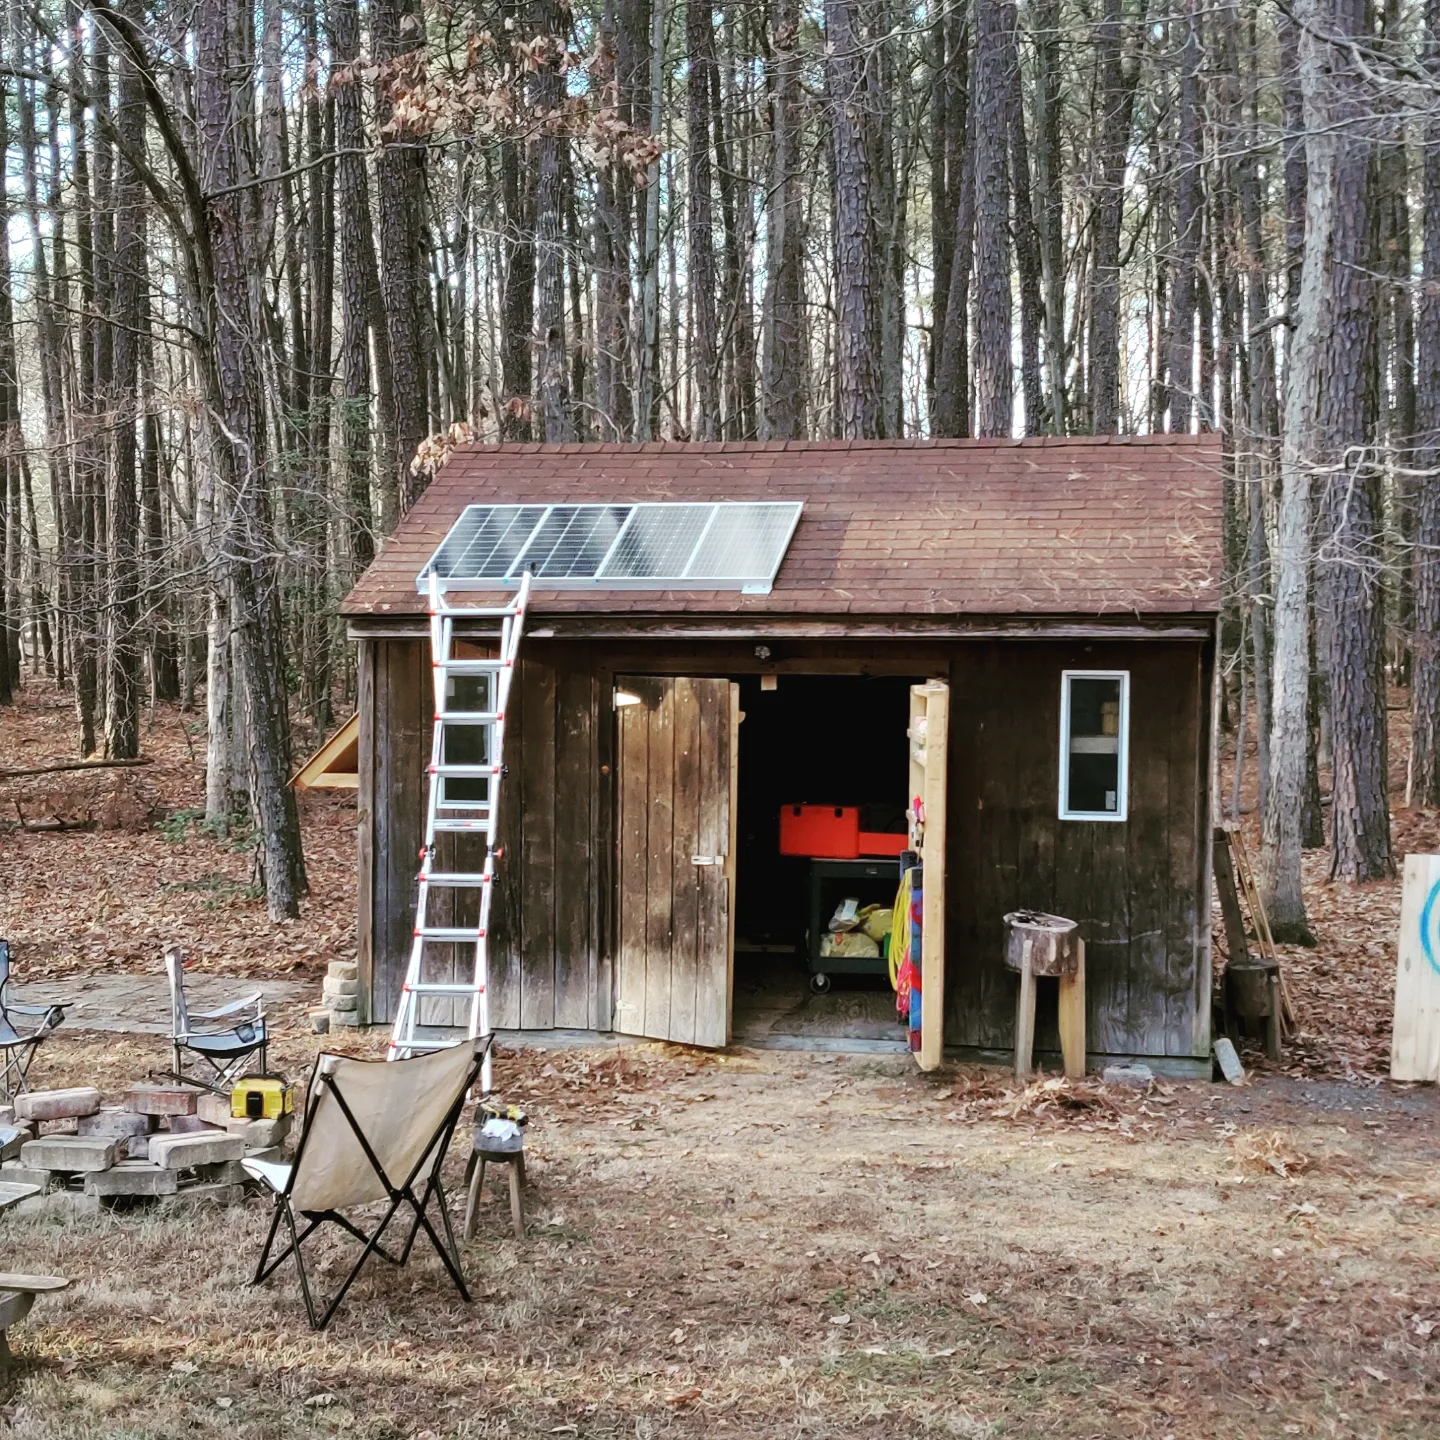 Woodworking off the grid: upgrades to my DIY solar workshop